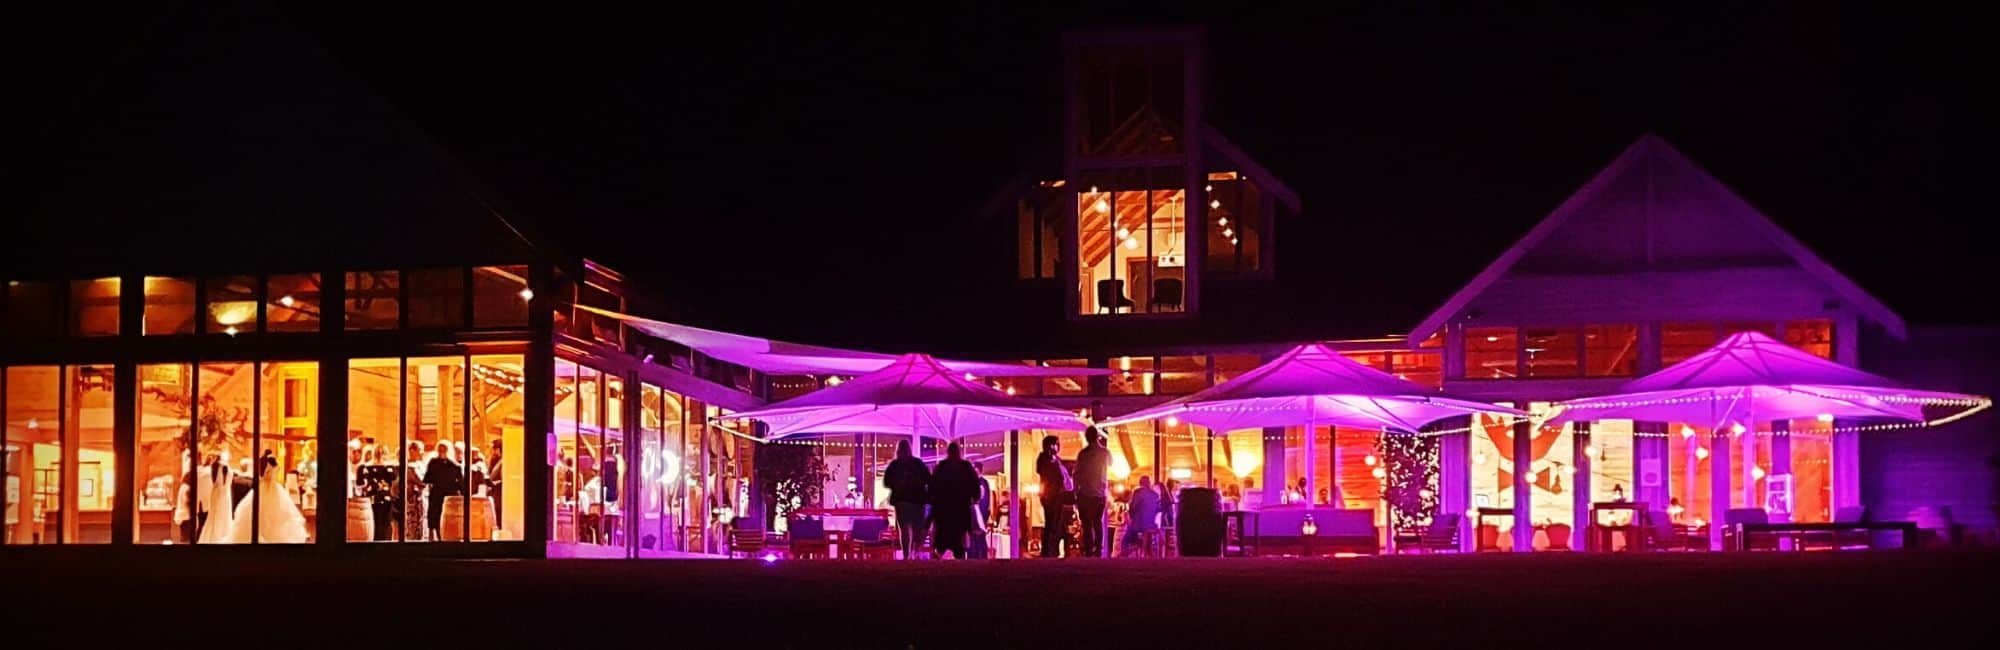 Hobart Events | Up Lighting Hire at Frogmore Creek